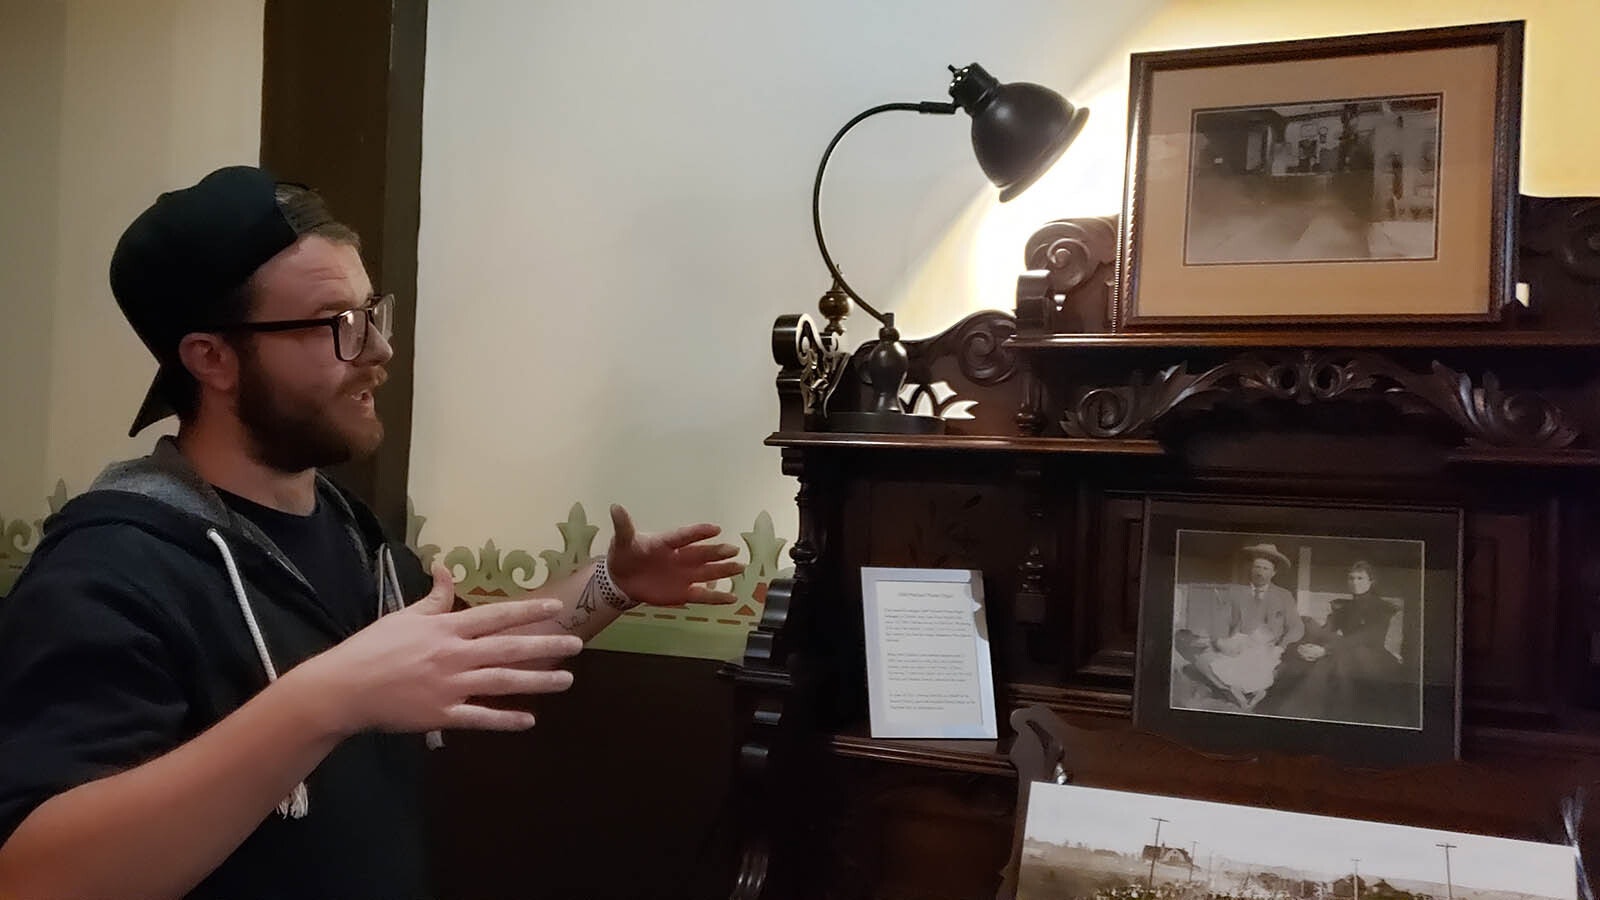 Michael Dykhorst talks about the history and the ghosts at the Sheridan Inn. The hotel is one of five haunted Wyoming hotels that sociology researcher Debbie Cobb is studying as part of her studies at University of Wyoming.